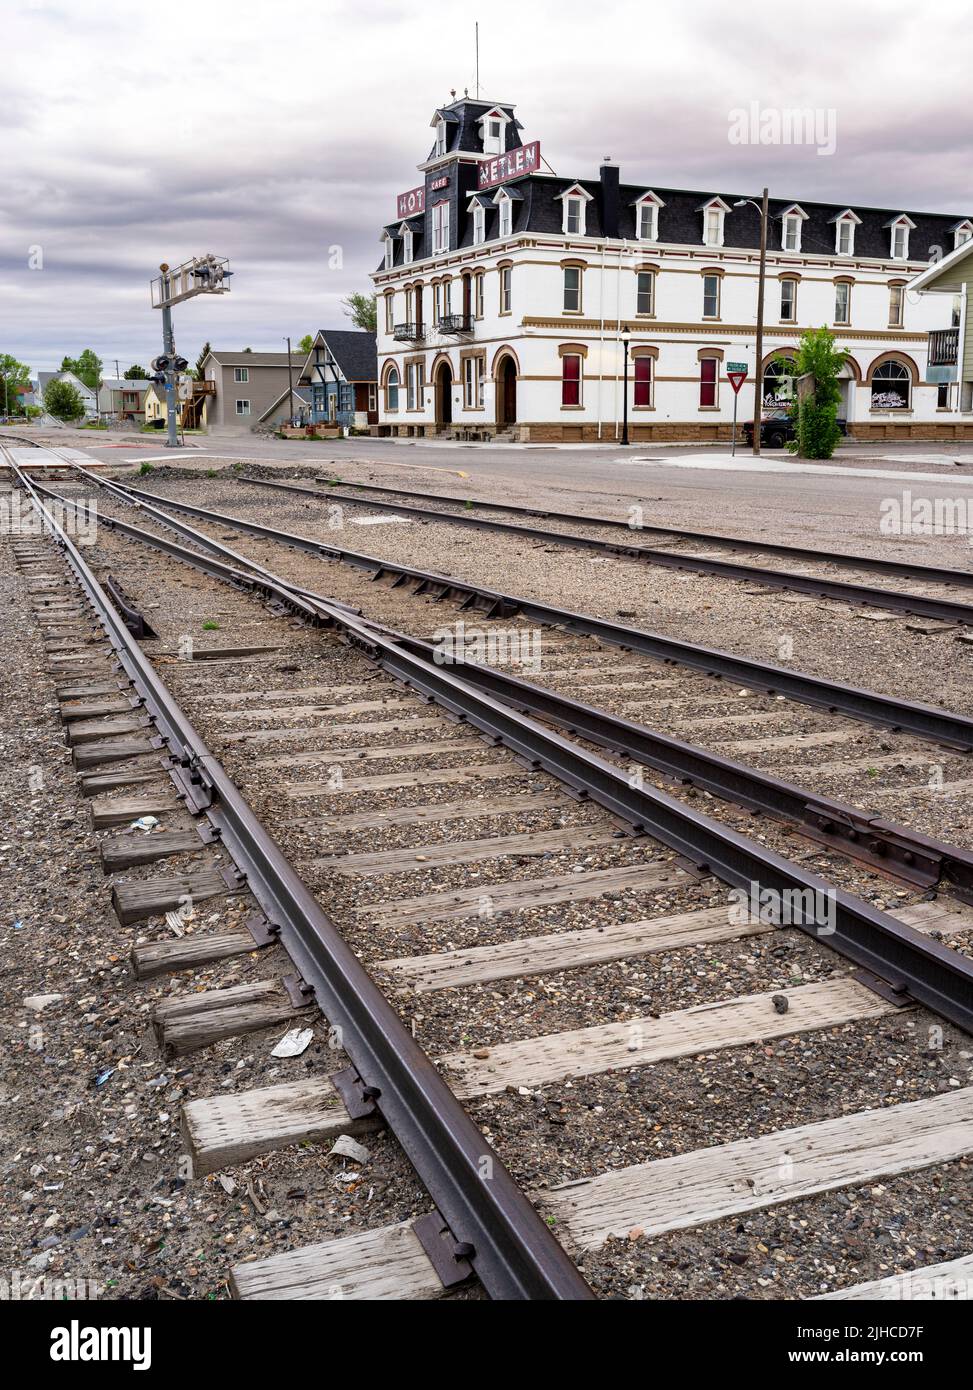 Along the rail tracks in Dillon Montana hotel and crossing lights Stock Photo